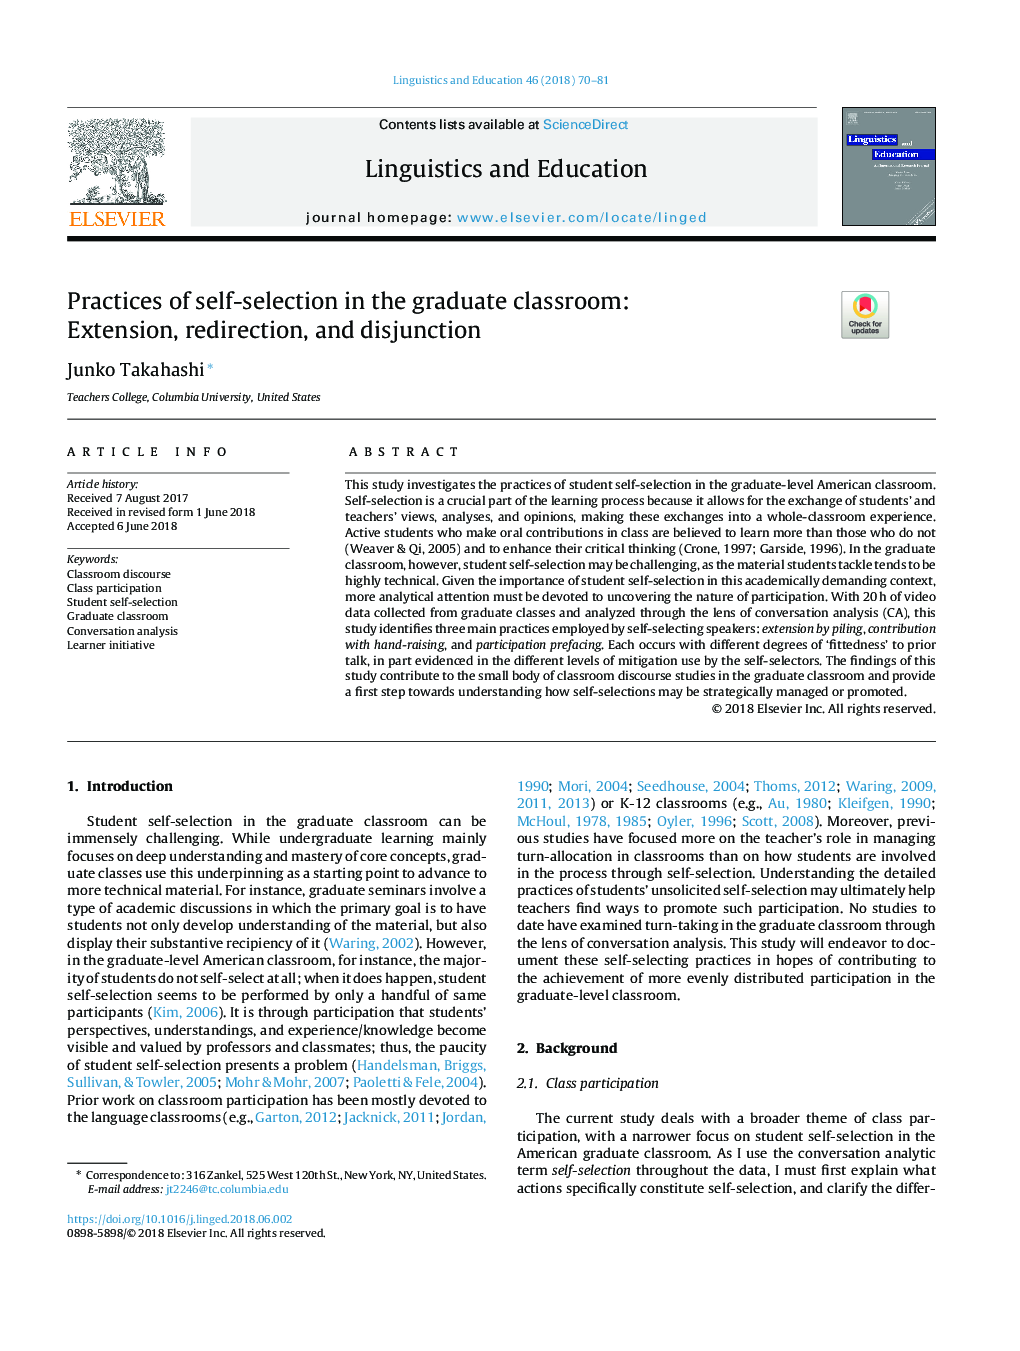 Practices of self-selection in the graduate classroom: Extension, redirection, and disjunction